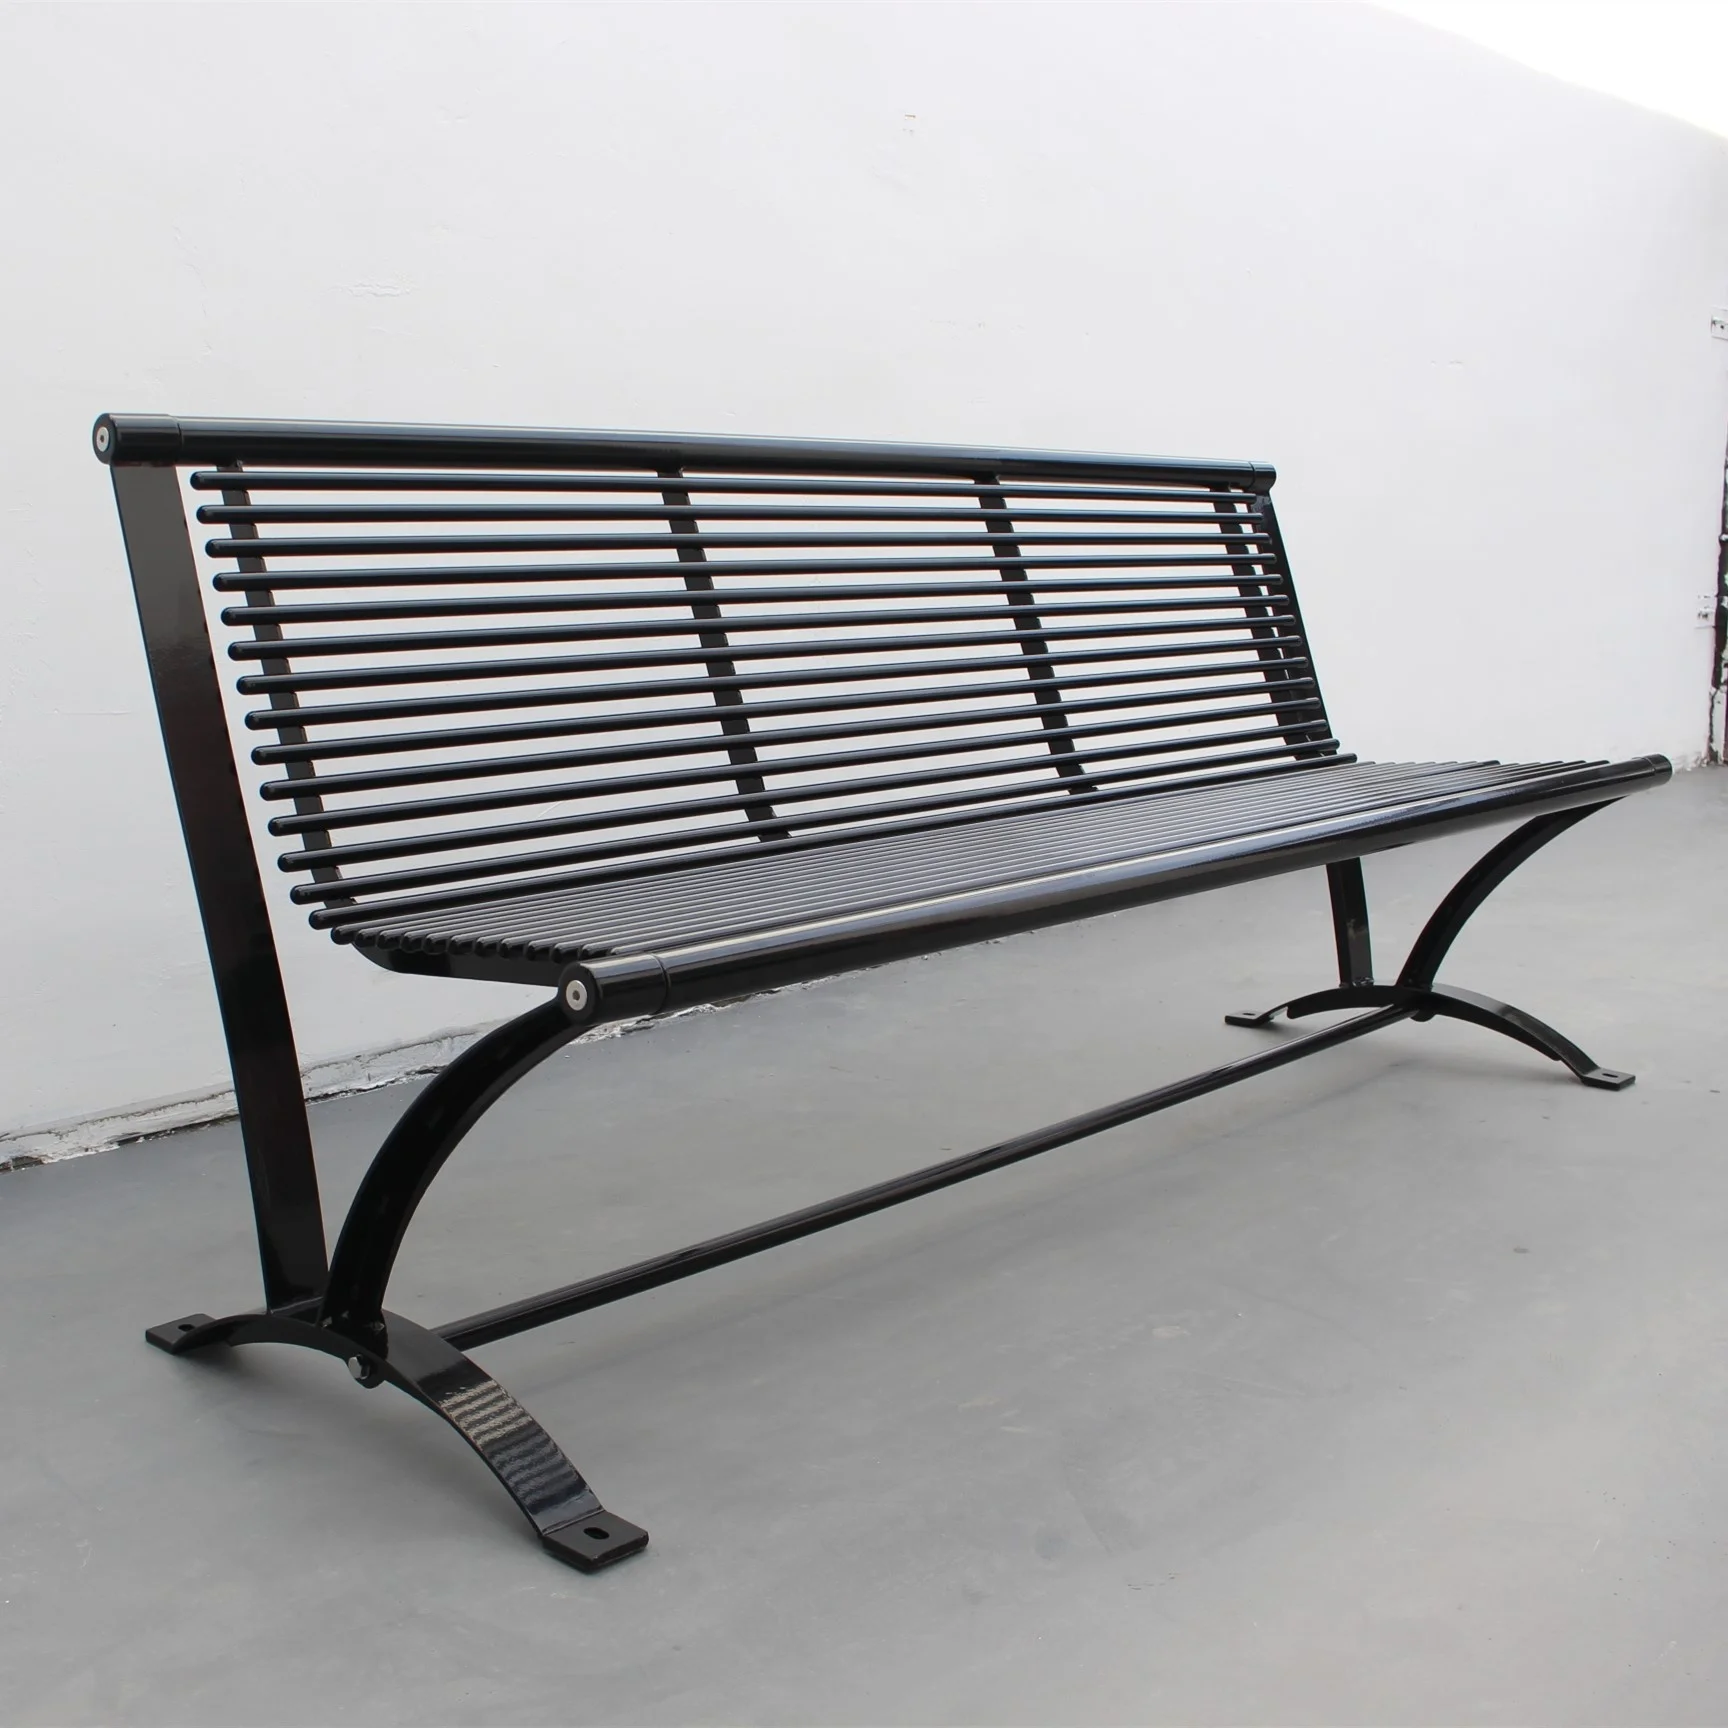 6 Feet Long Metal Steel Tubular Outside Bench For Public Park Street Seating Outdoor Bench Seat Buy Outside Bench